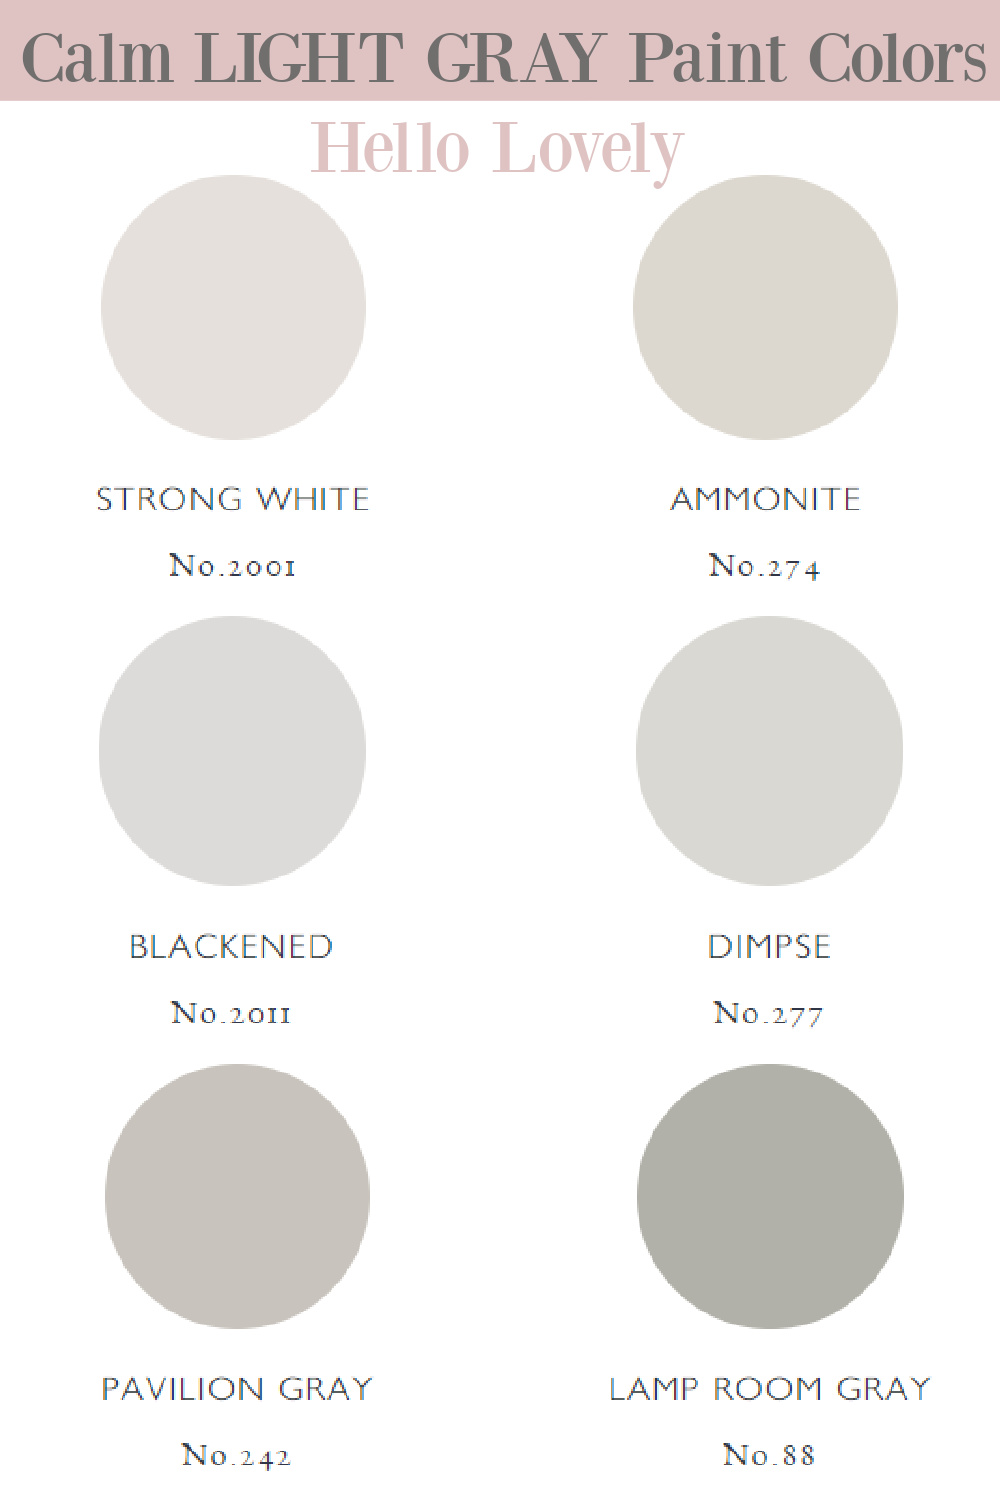 9 Light Gray Paint Colors a Zen Look You May - Hello Lovely